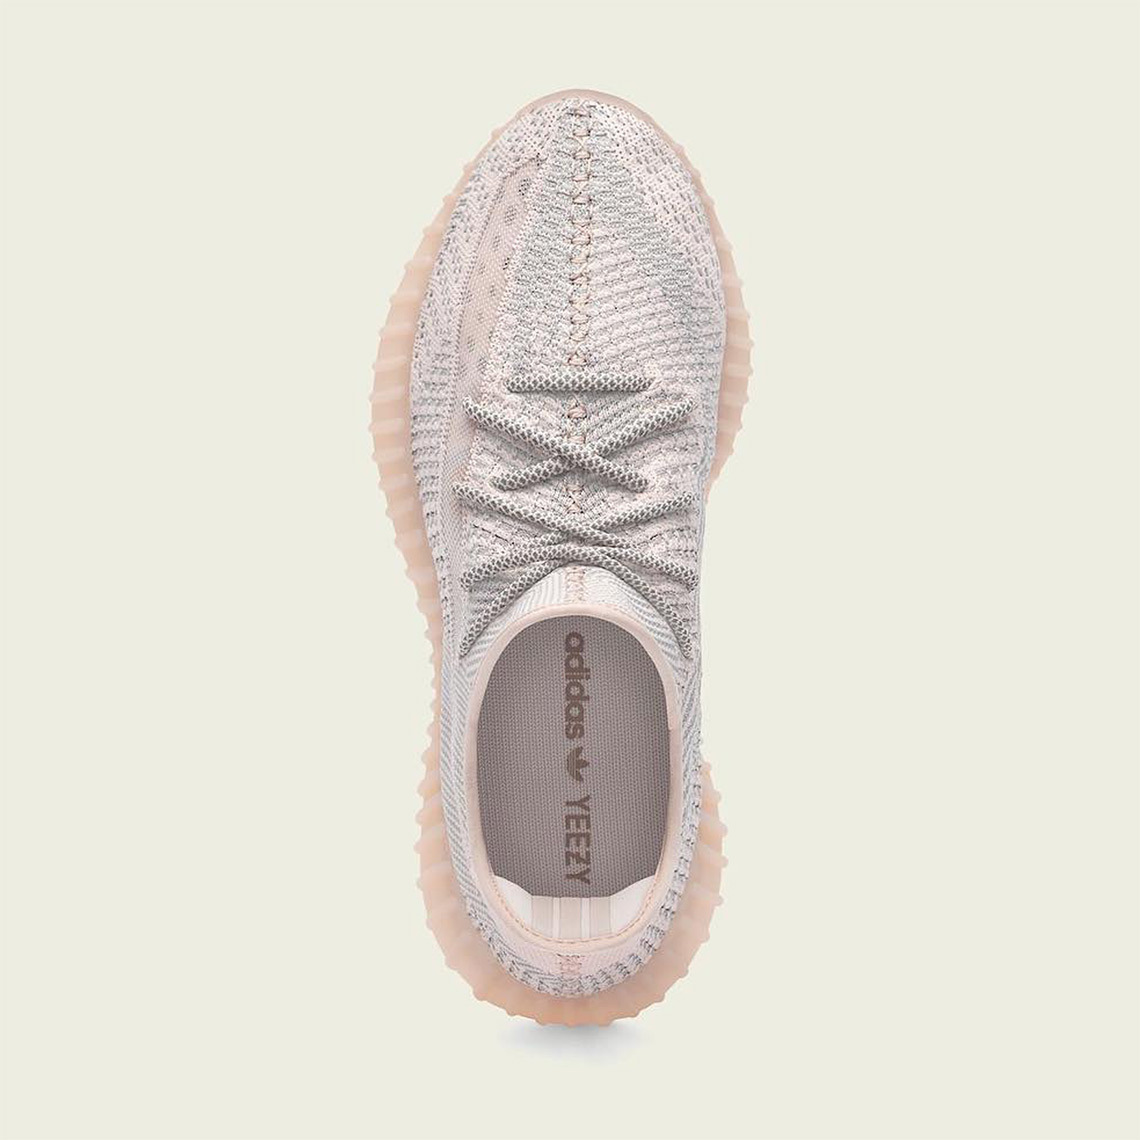 Adidas Yeezy 350 Synth Release Date 2